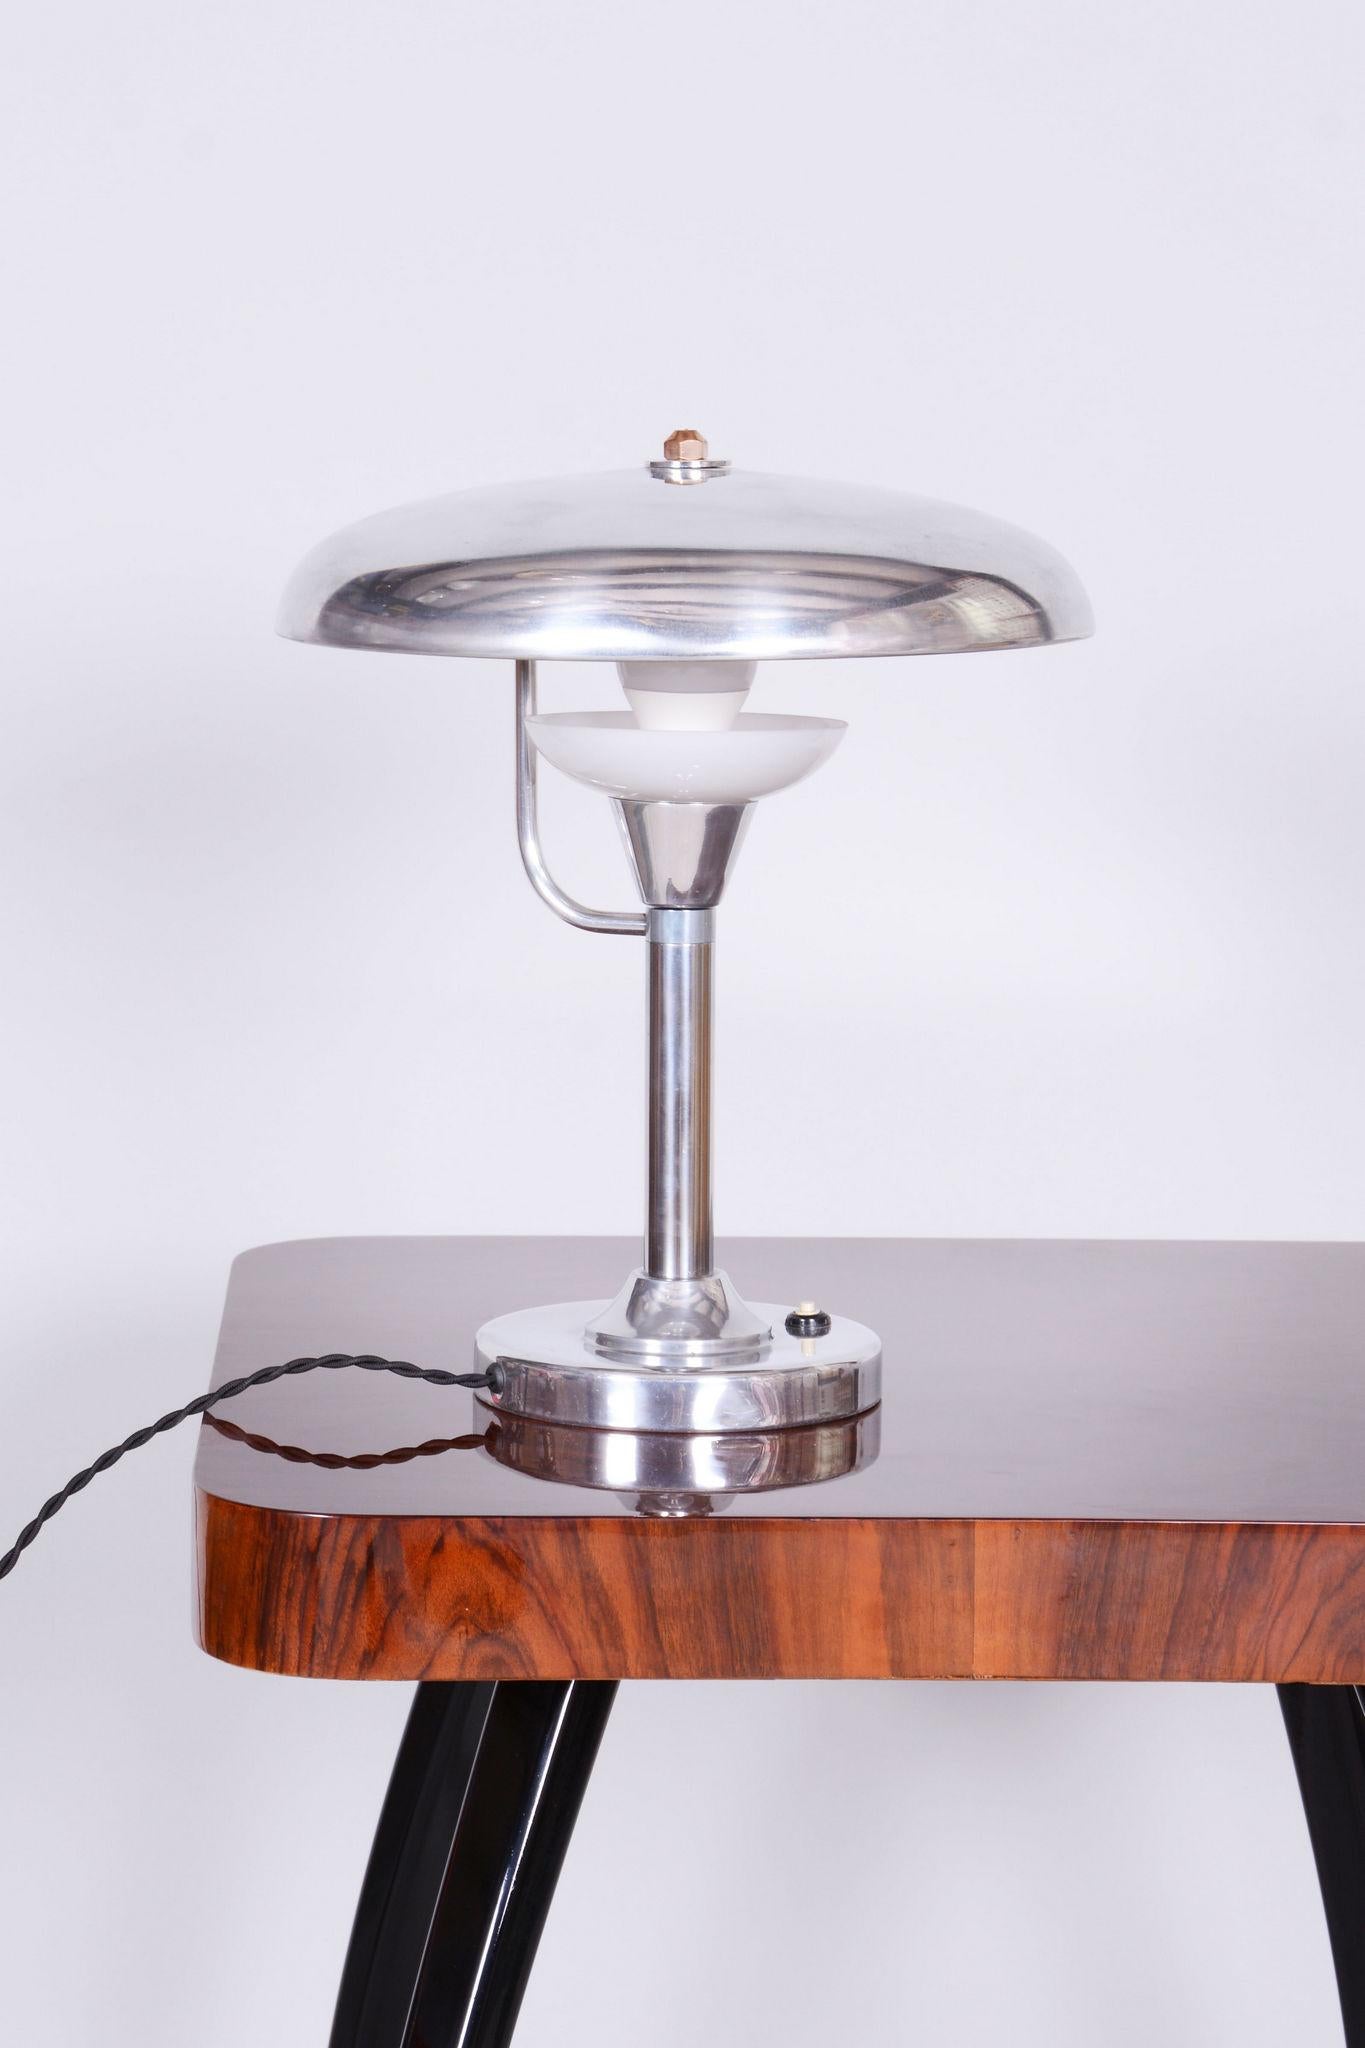 Restored Bauhaus Table Lamp, by Franta Anýž, Nickle-Plated Steel, Czech, 1920s For Sale 1